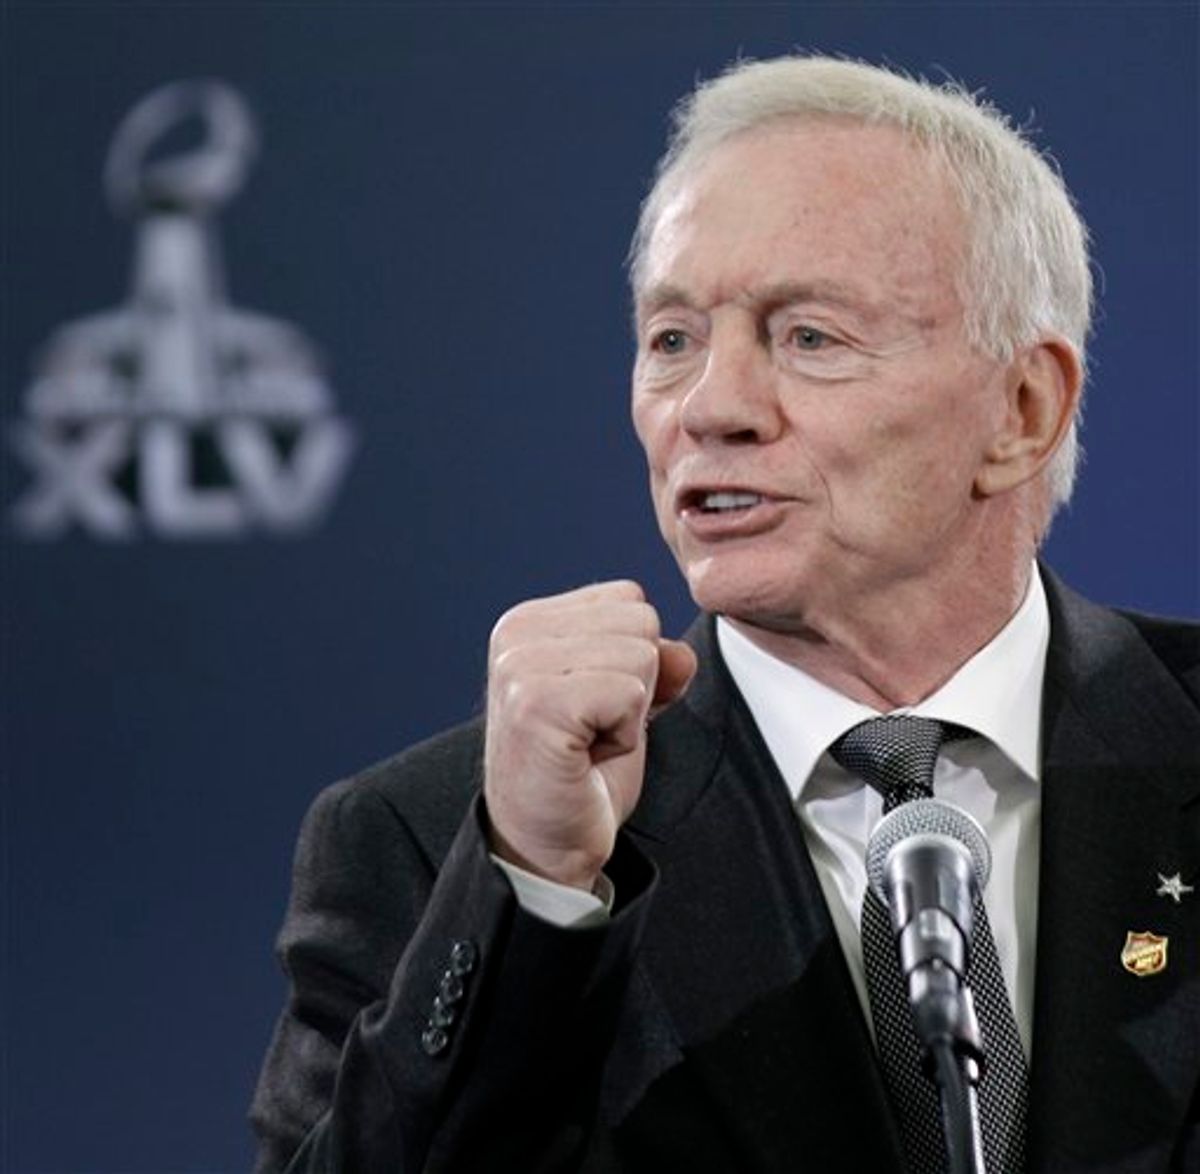 Dallas Cowboys owner Jerry Jones talks about his team during a news conference Tuesday, Feb. 1, 2011, in Dallas. The Pittsburgh Steelers will play the Green Bay Packers in Super Bowl XLV at Cowboys Stadium Sunday, Feb. 6, 2011. (AP Photo/David J. Phillip) (AP)